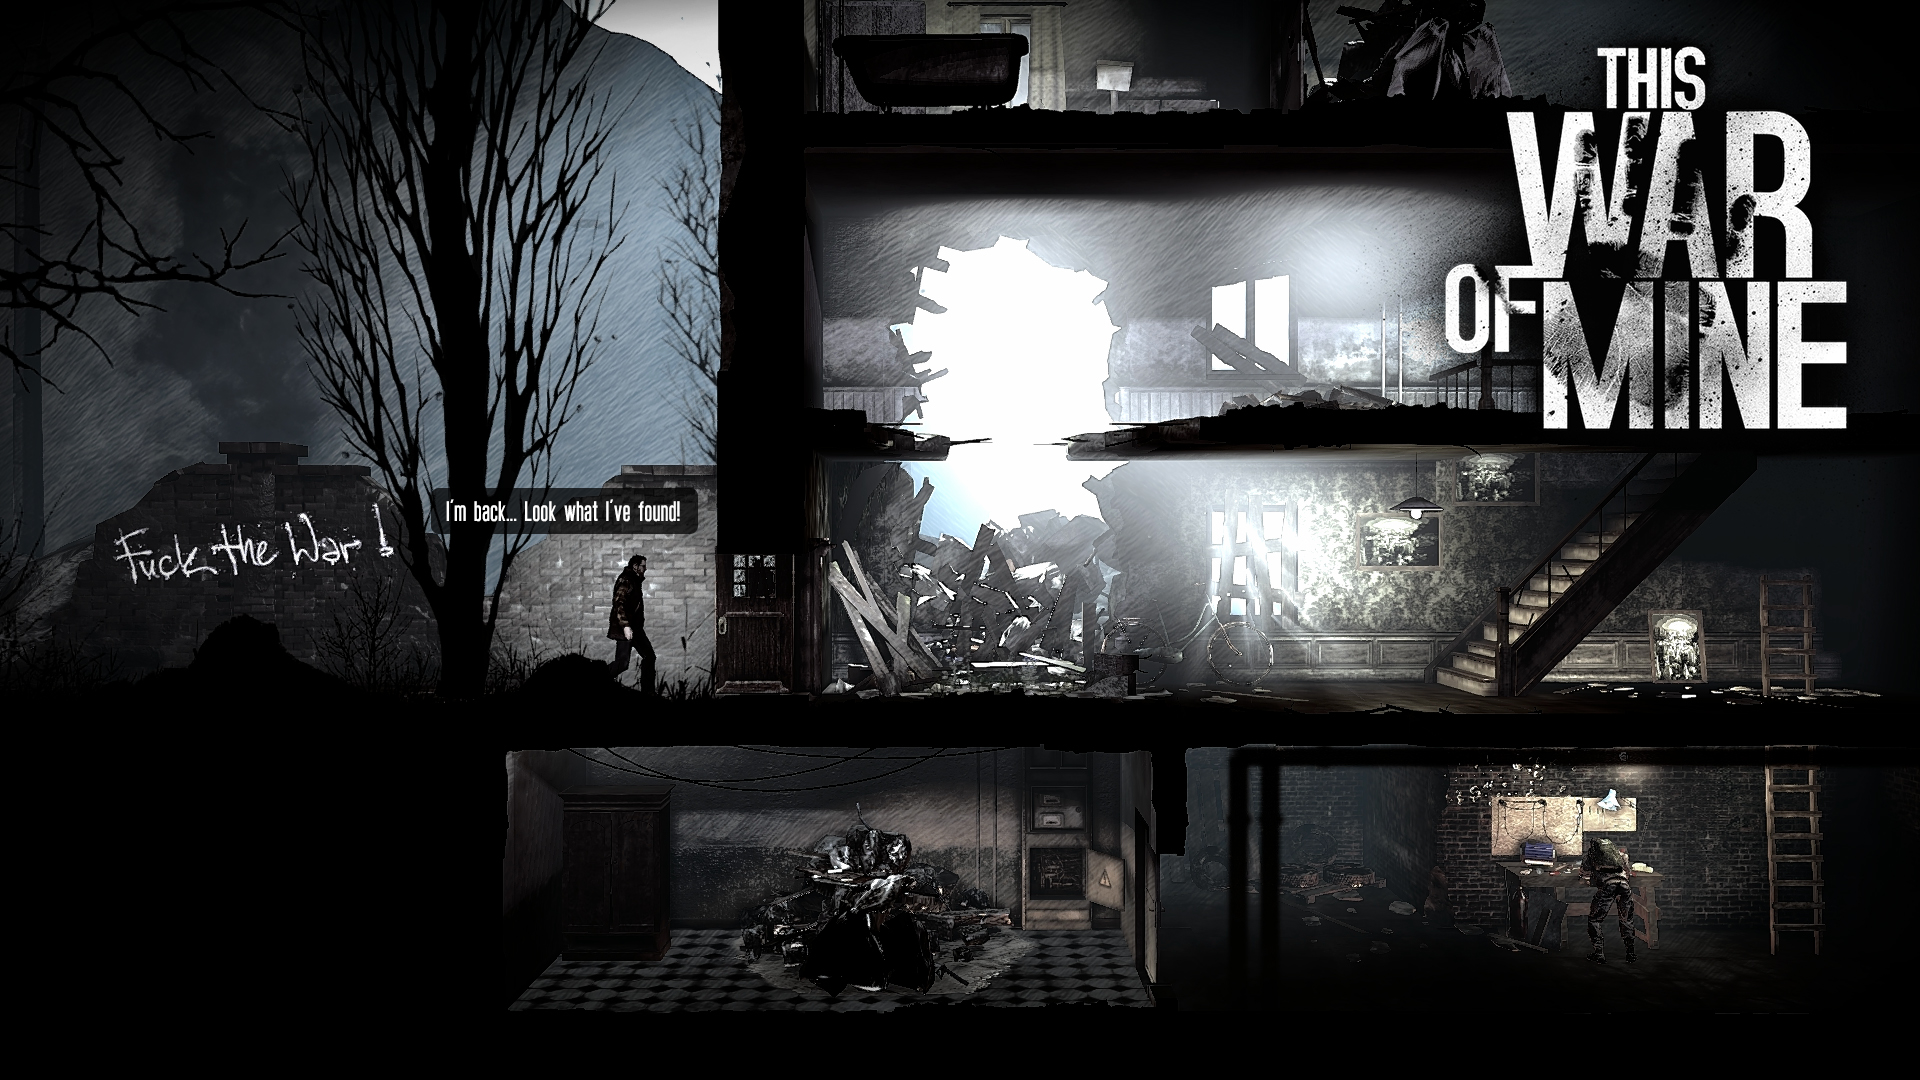 This War of Mine Images 